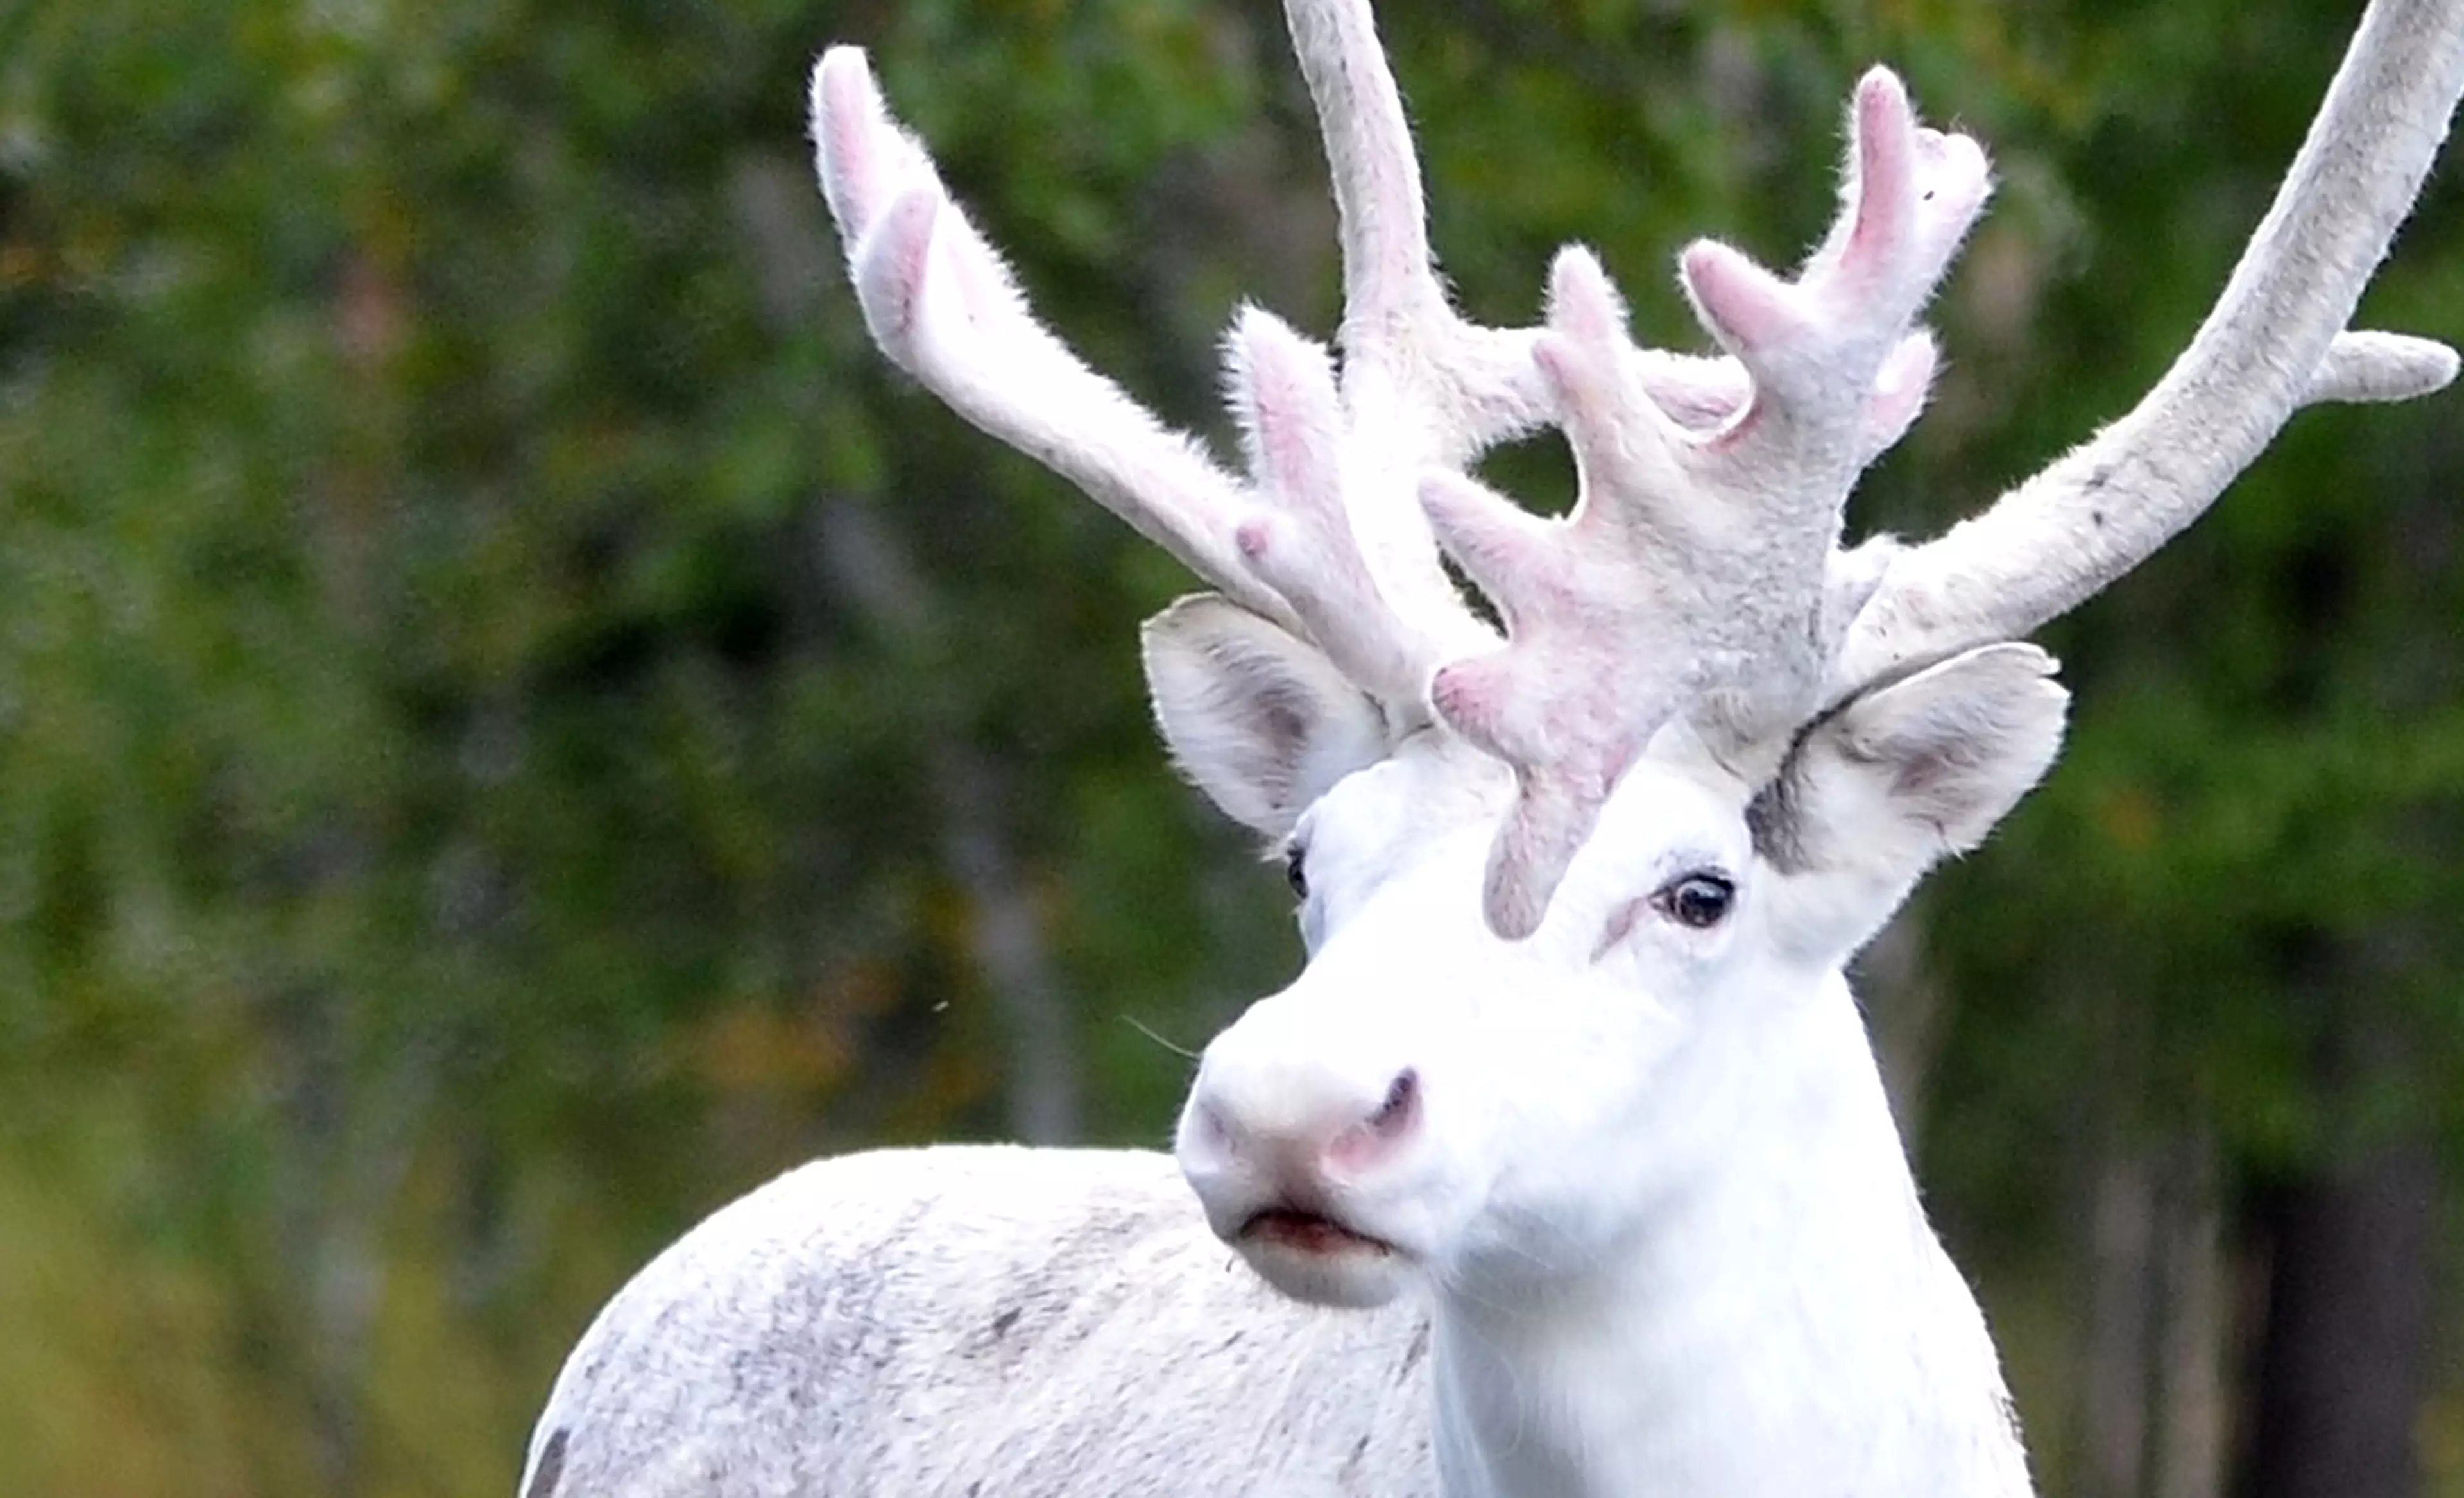 An adult male reindeer was spotted in Sweden in 2016.